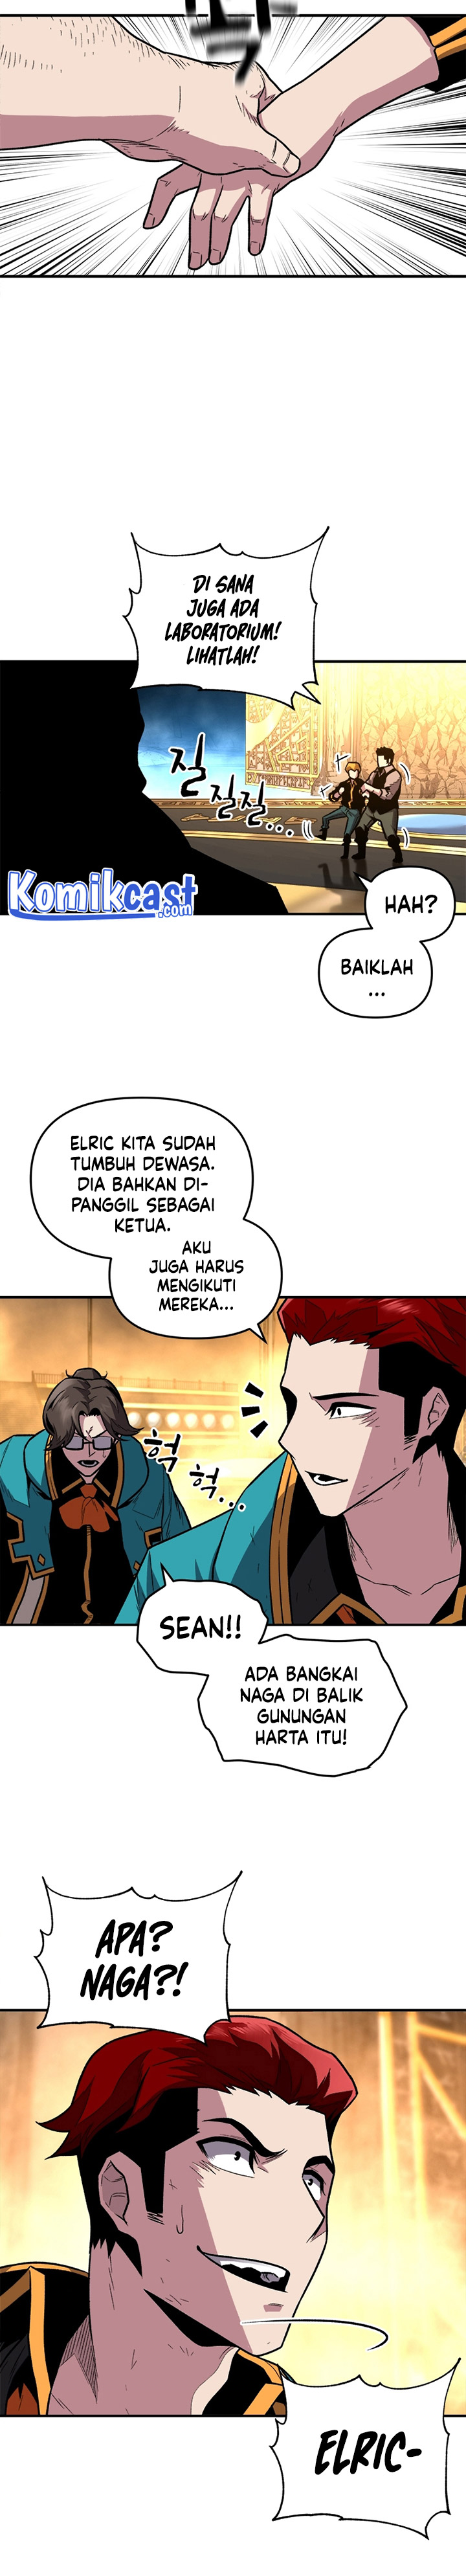 Talent-Swallowing Magician Chapter 05